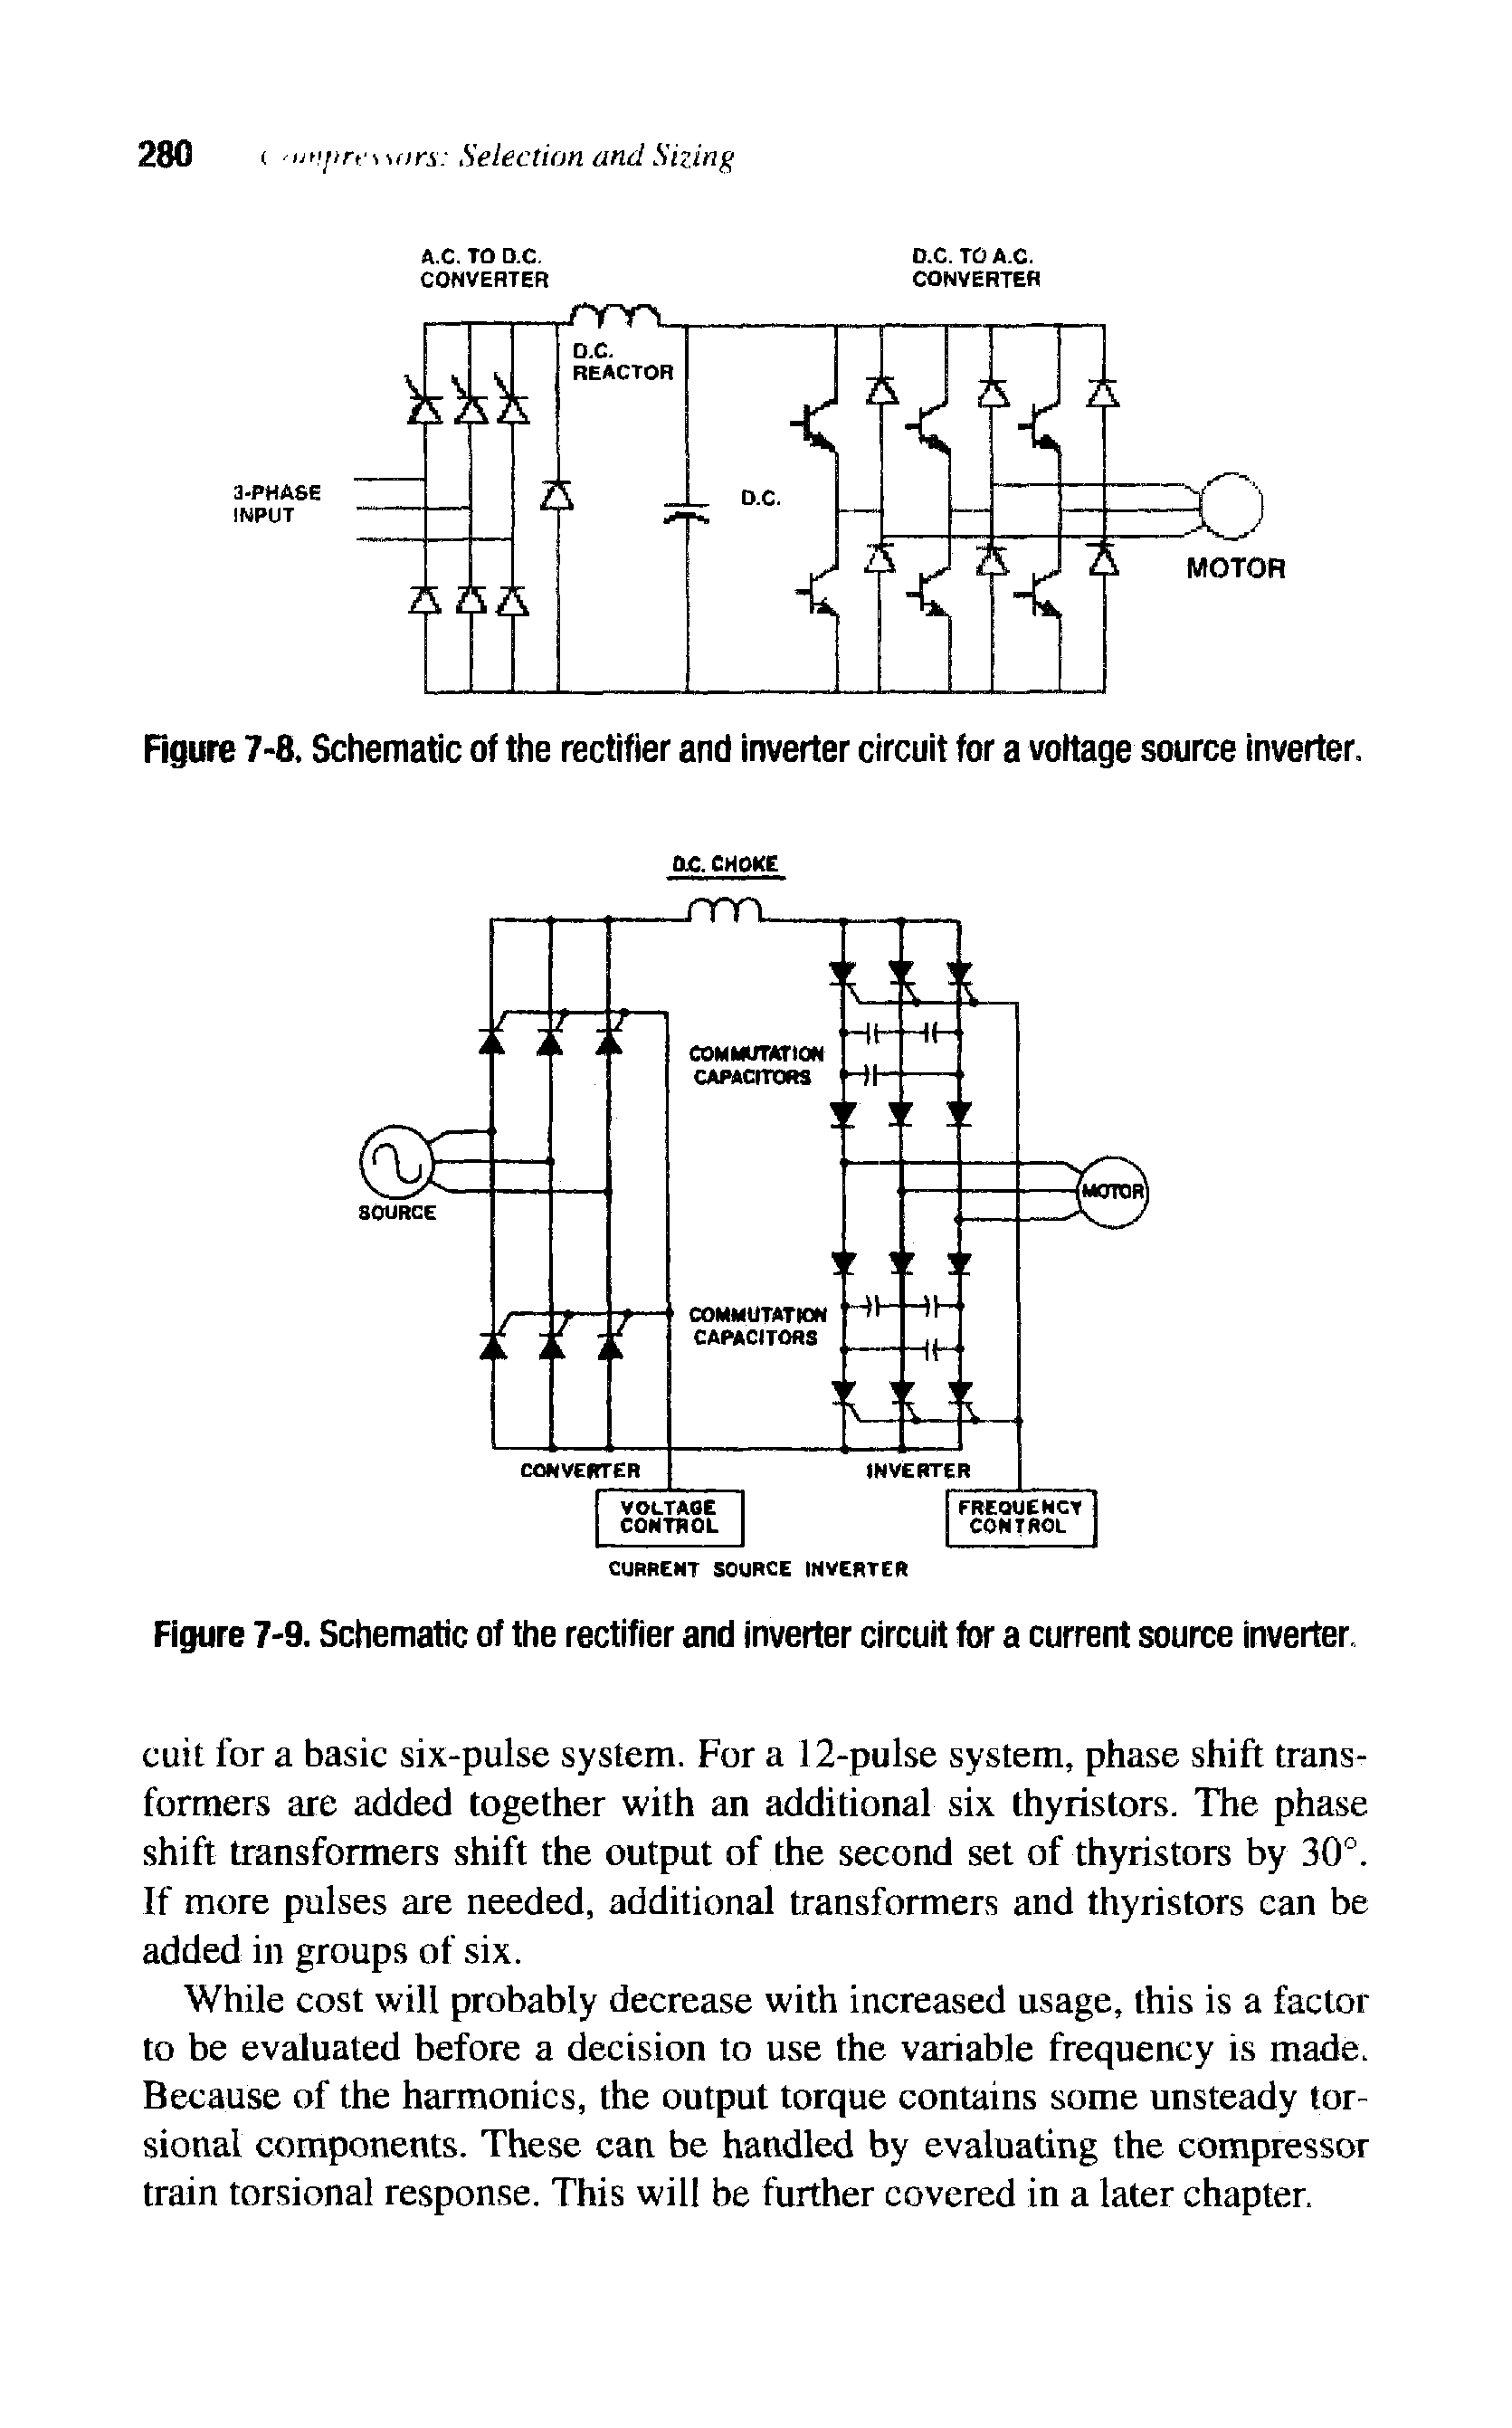 Figure 7-9. Schematic of the rectifier and inverter circuit for a current source inverter.